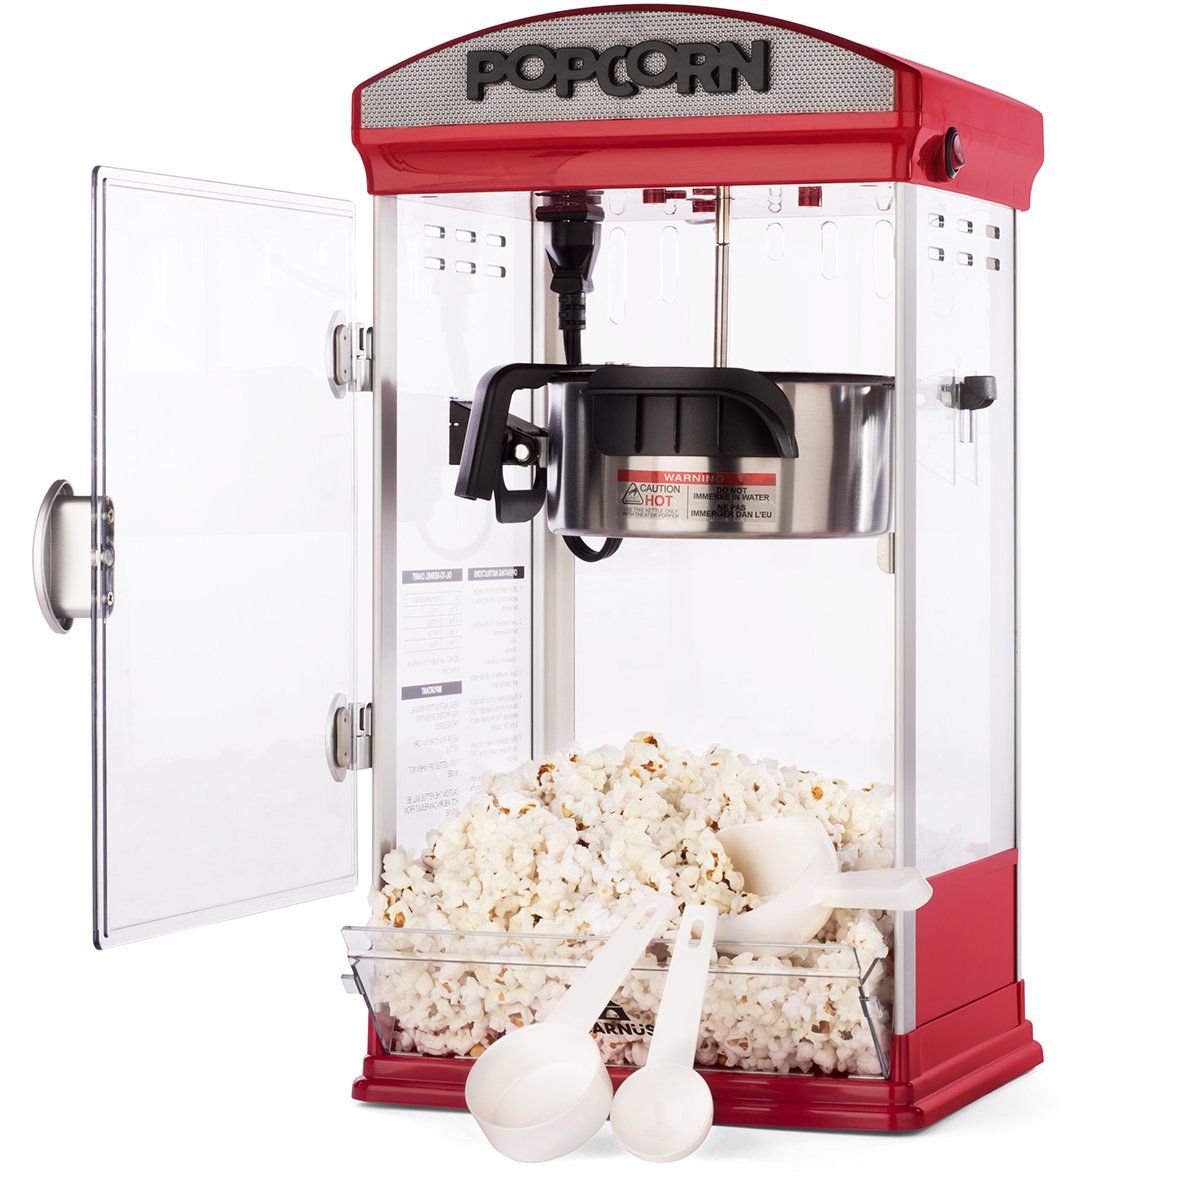 Carnus Home Popcorn Machine | Features Popcorn Maker with Popcorn Scoop, Measuring Cup, & Butter Spoon | 4 ounce Kettle Popper